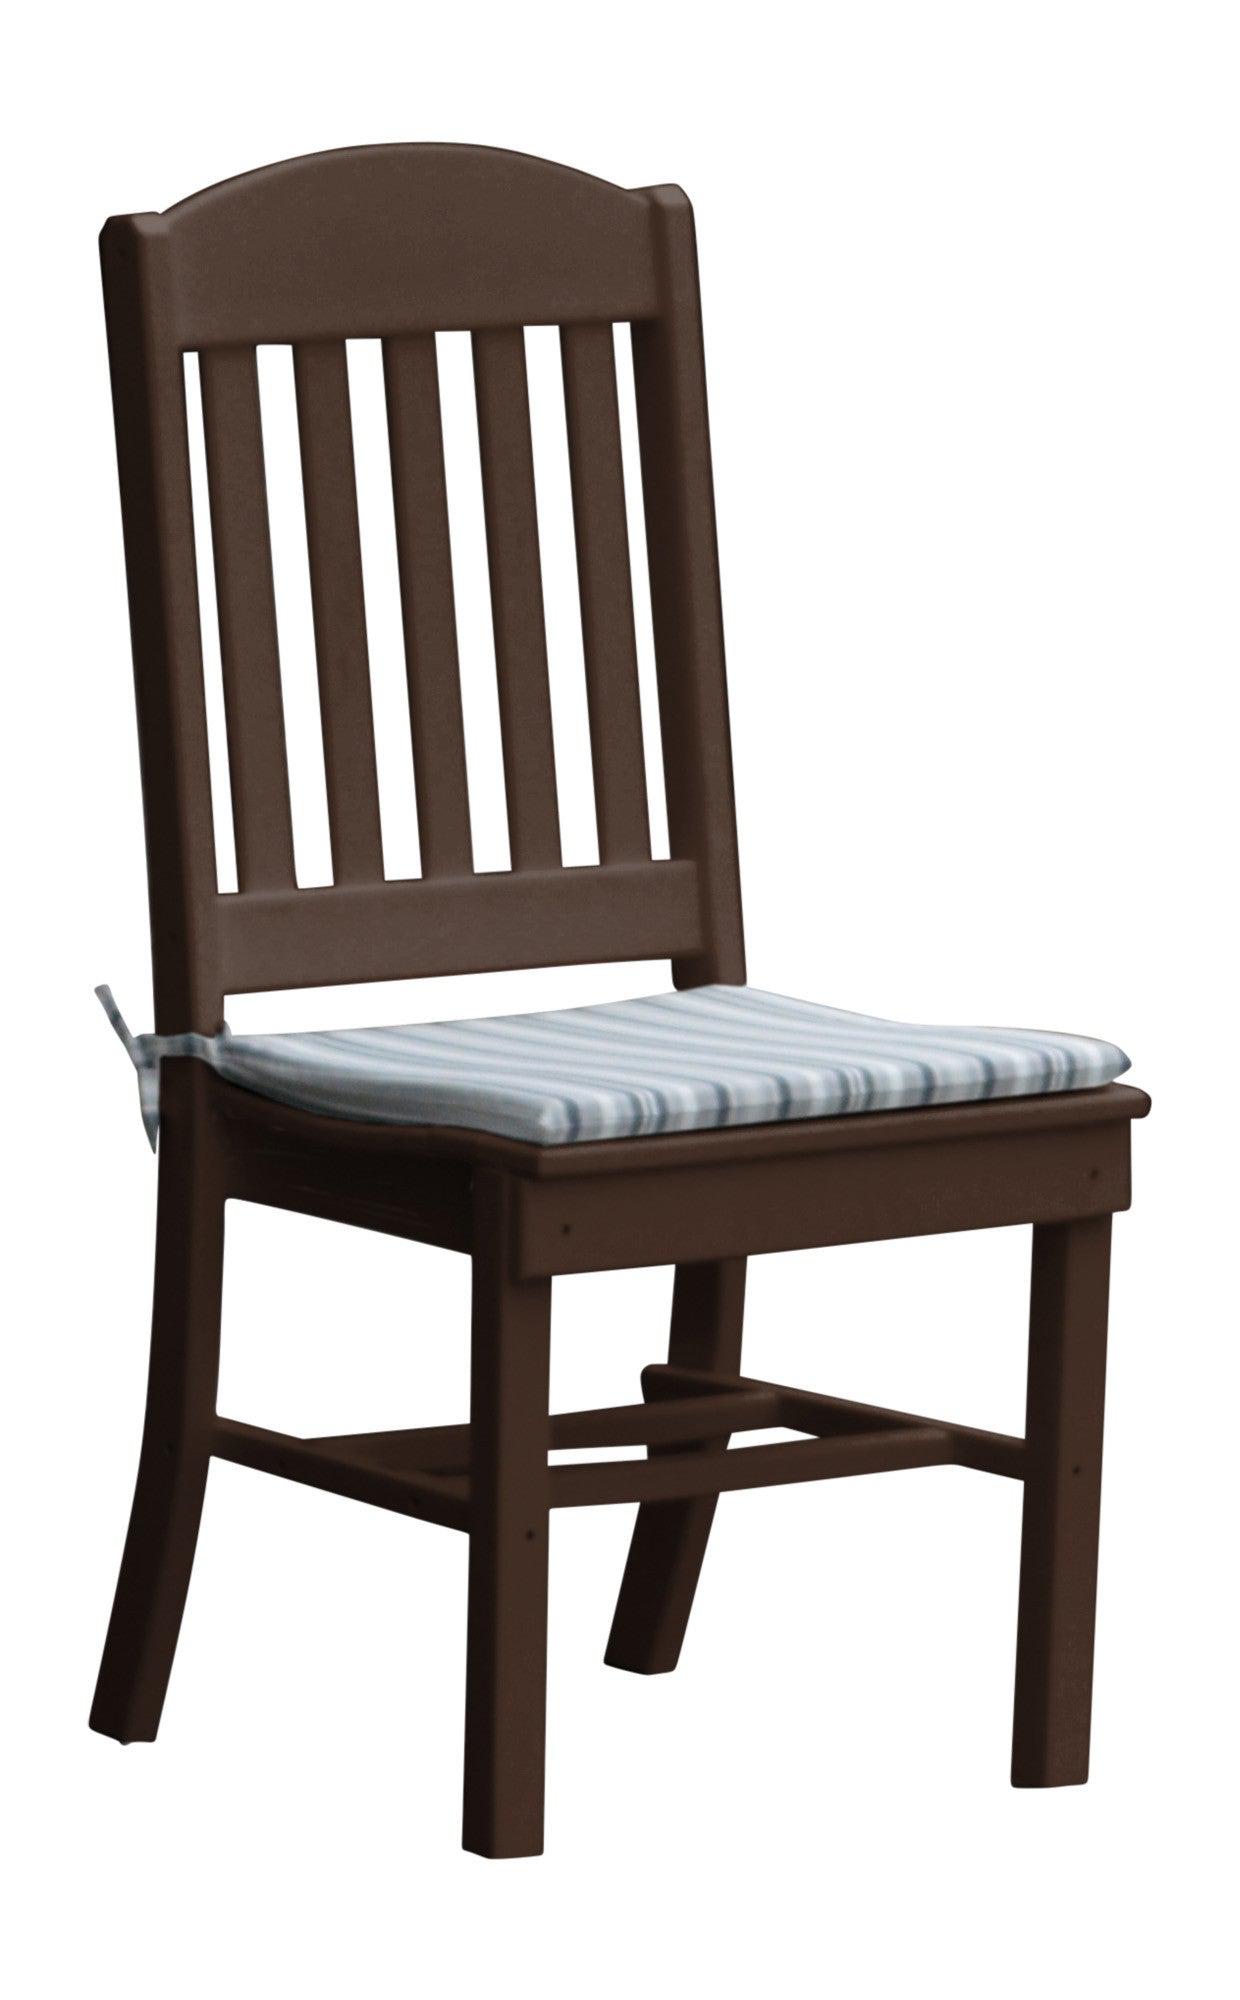 A&L Furniture Company Recycled Plastic Classic Dining Chair - Tudor Brown